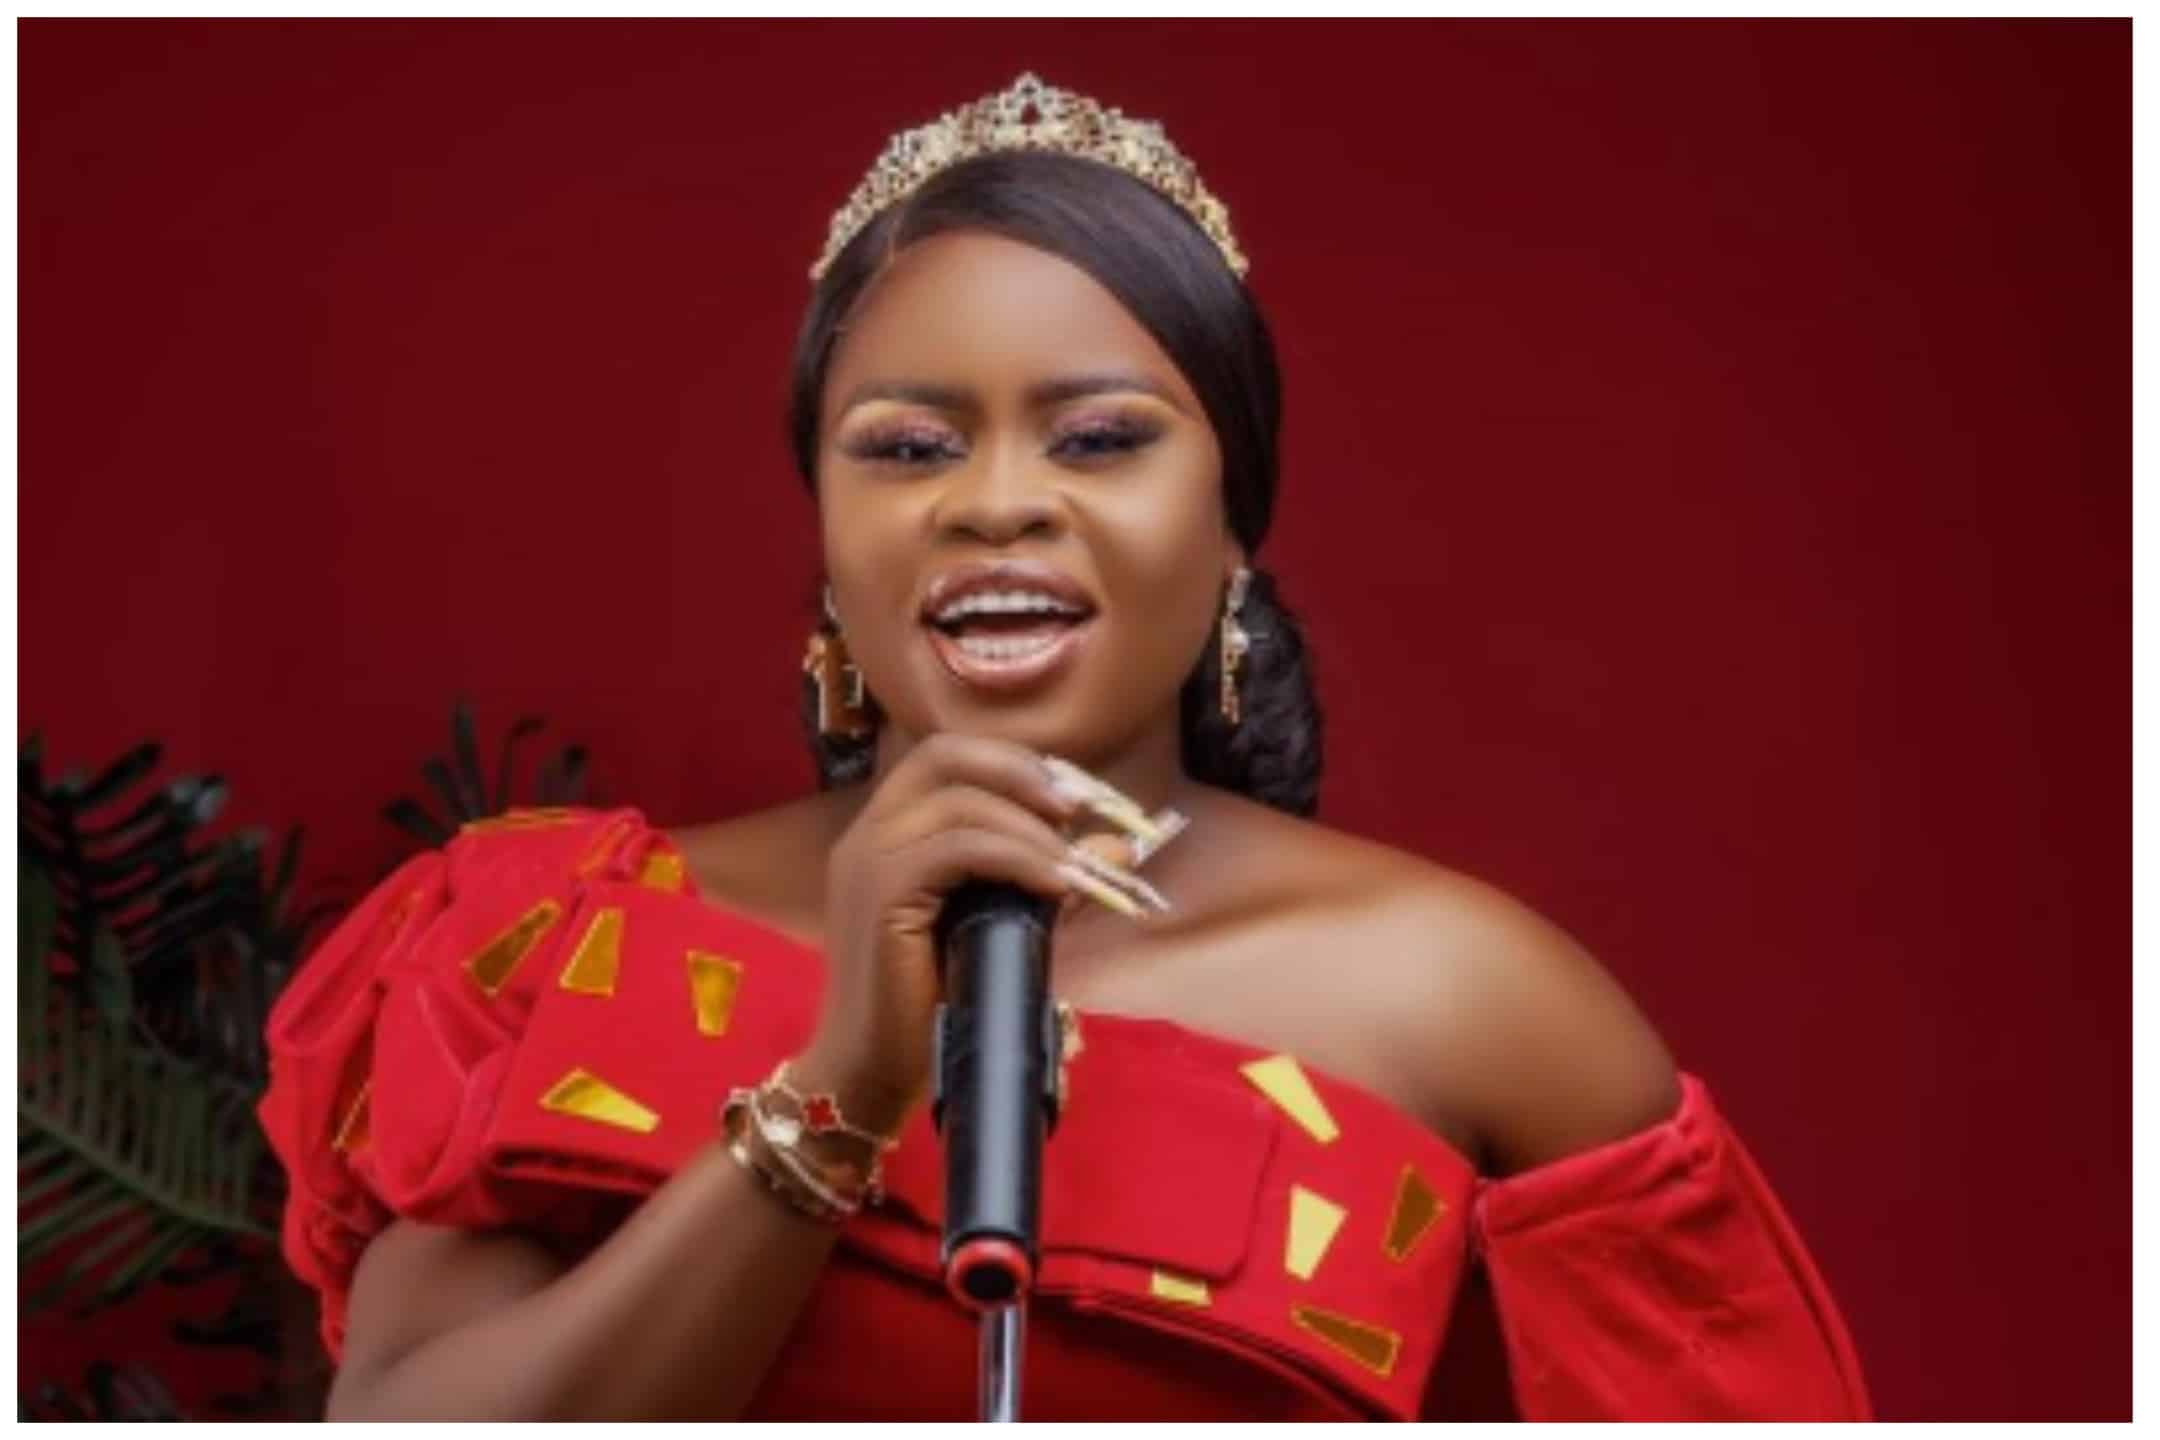 Nigerian Highlife Musician Ikesima Brown and Band Members Killed in Tragic Road Collision